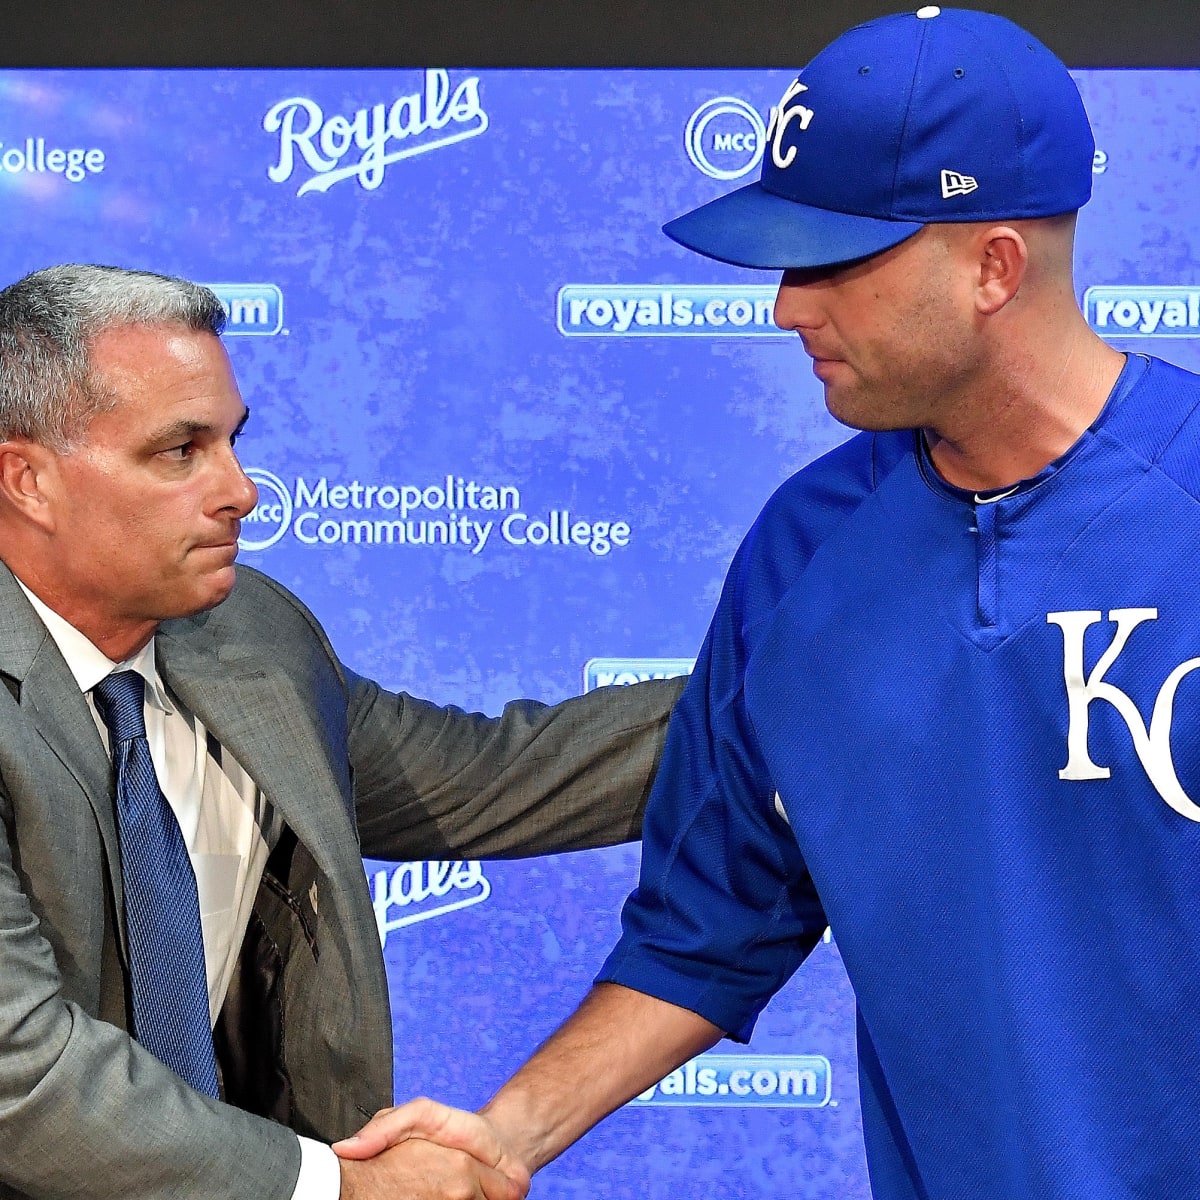 Dayton Moore Just Wants the Royals to Get Better - The New York Times